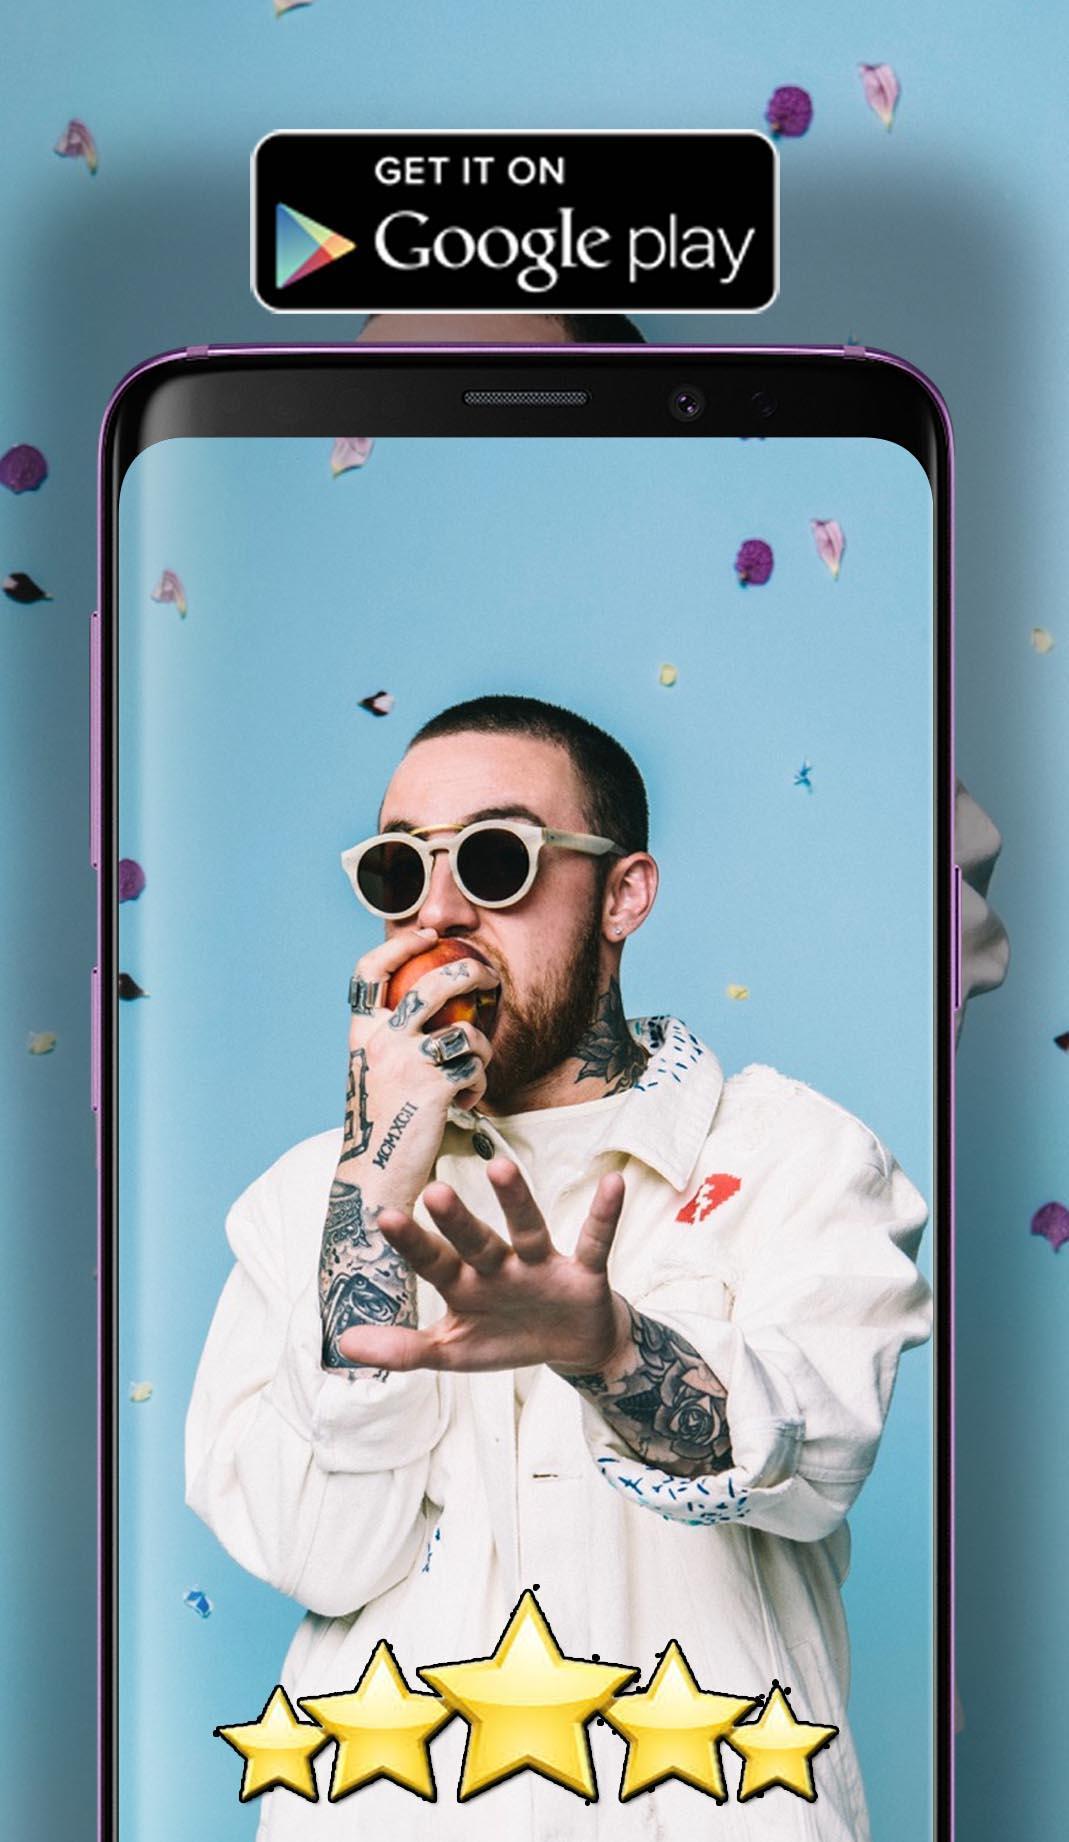 Mac Miller Wallpaper Hd For Android Apk Download